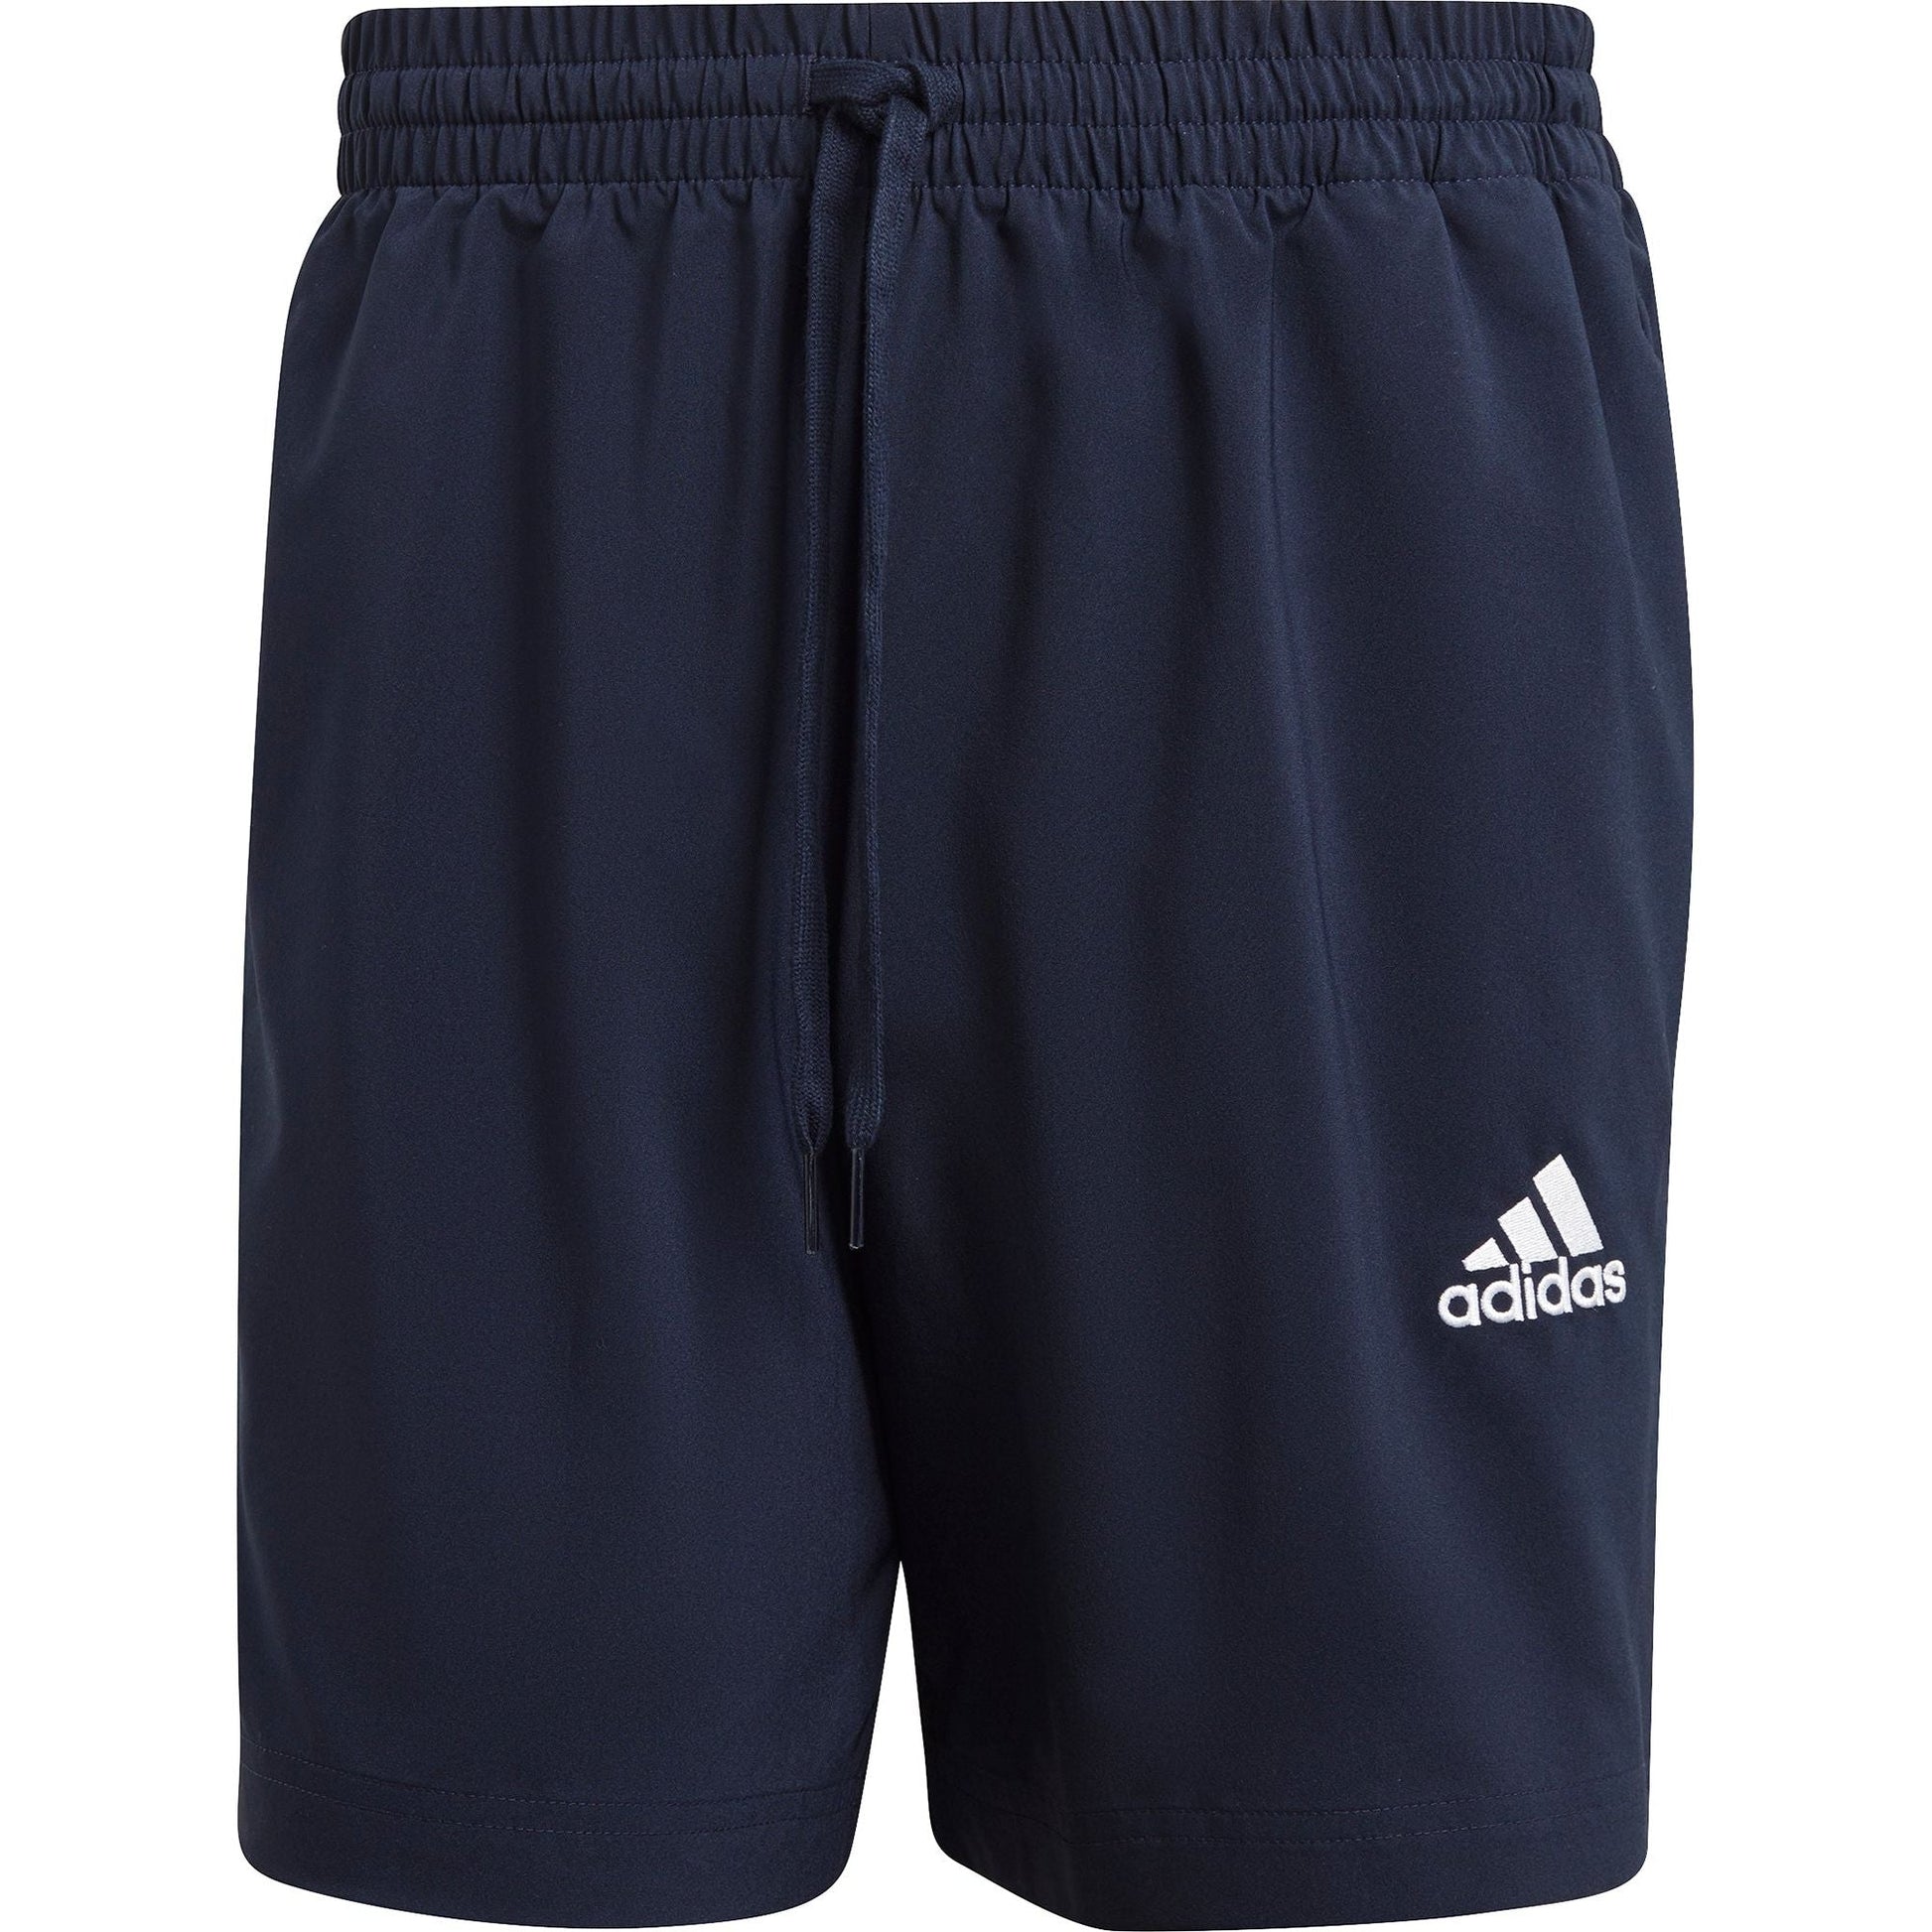 Adidas Aeroready Essentials Chelsea Shorts Gk9603 Front - Front View